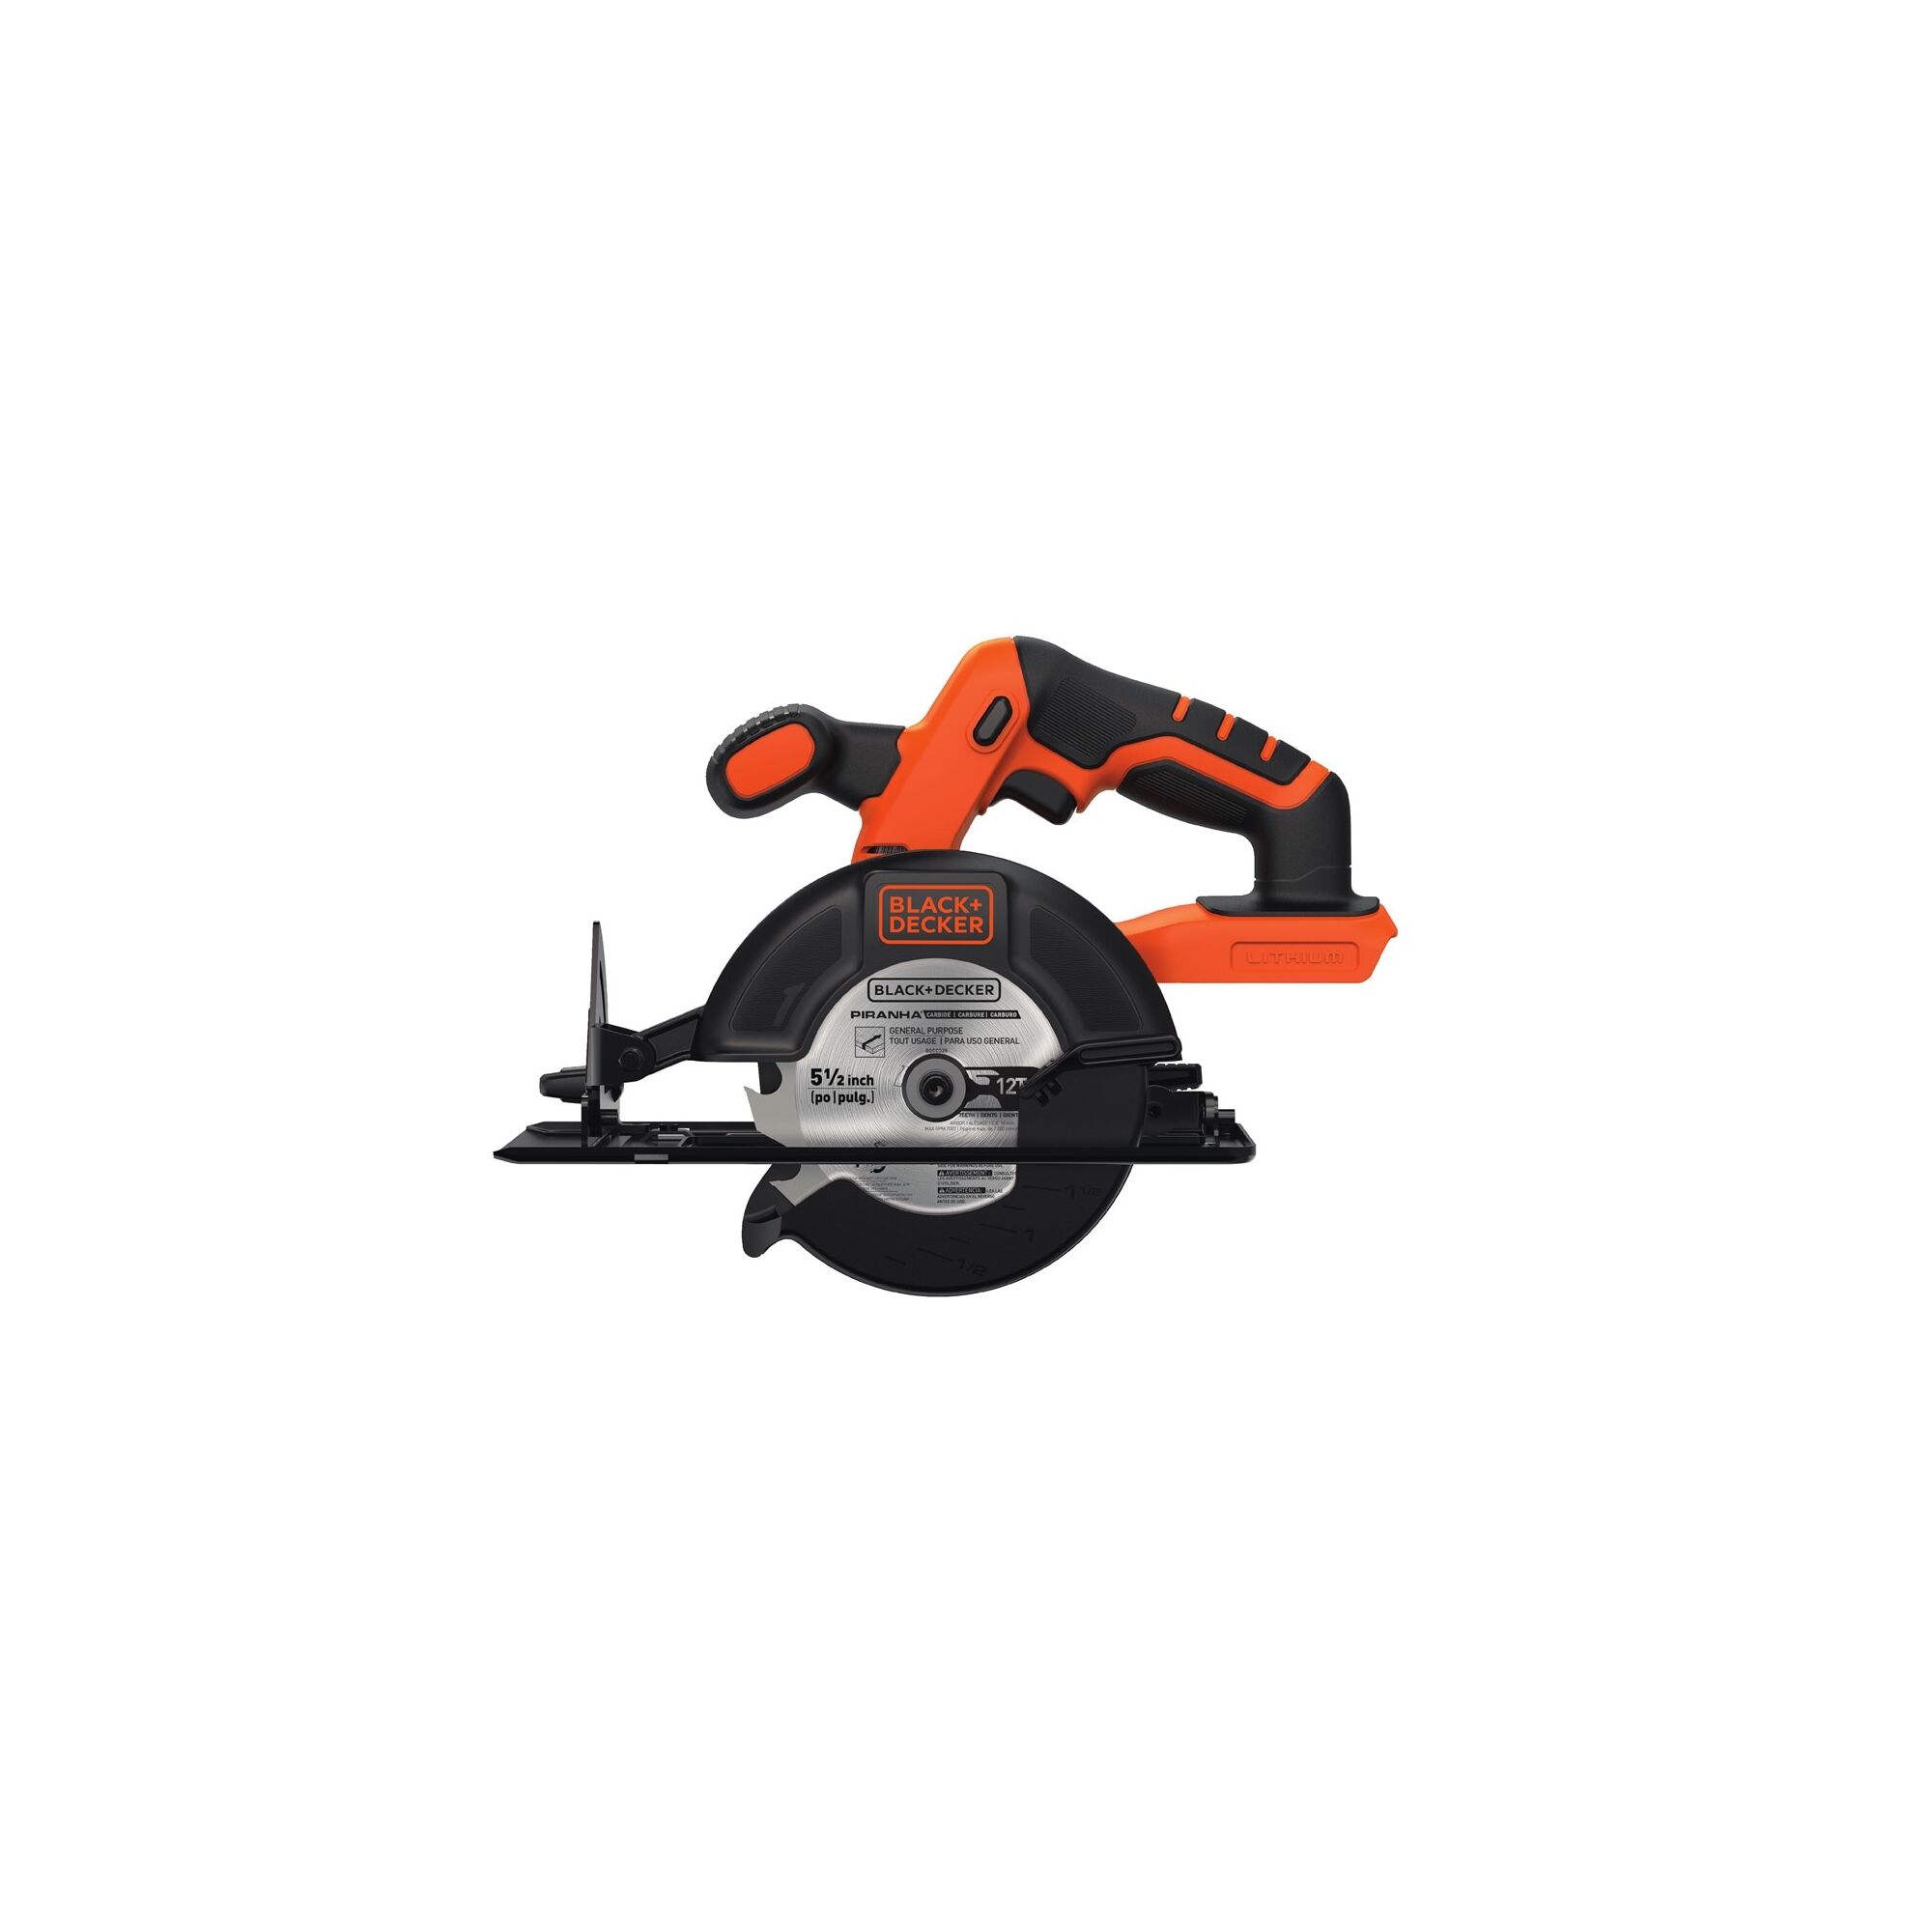 Profile of BLACK+DECKER cordless circular saw with no battery on it